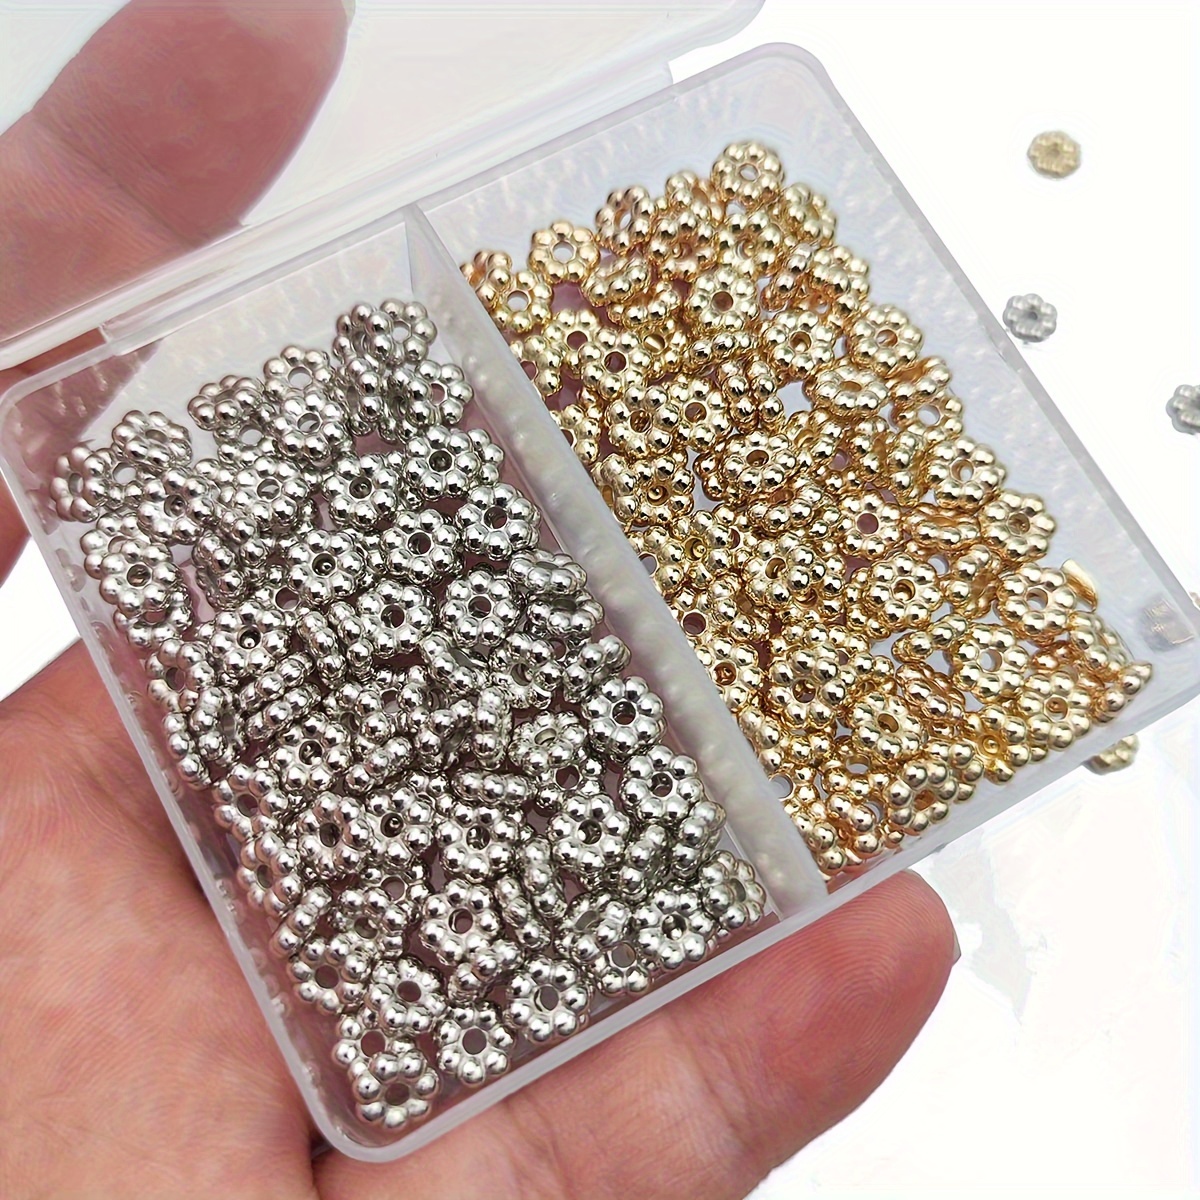 50/100pcs Rhinestone Spacer Beads Mix Color Czech Crystal Metal Spacers for  Jewelry Making DIY Earrings Bracelets Accessories - AliExpress